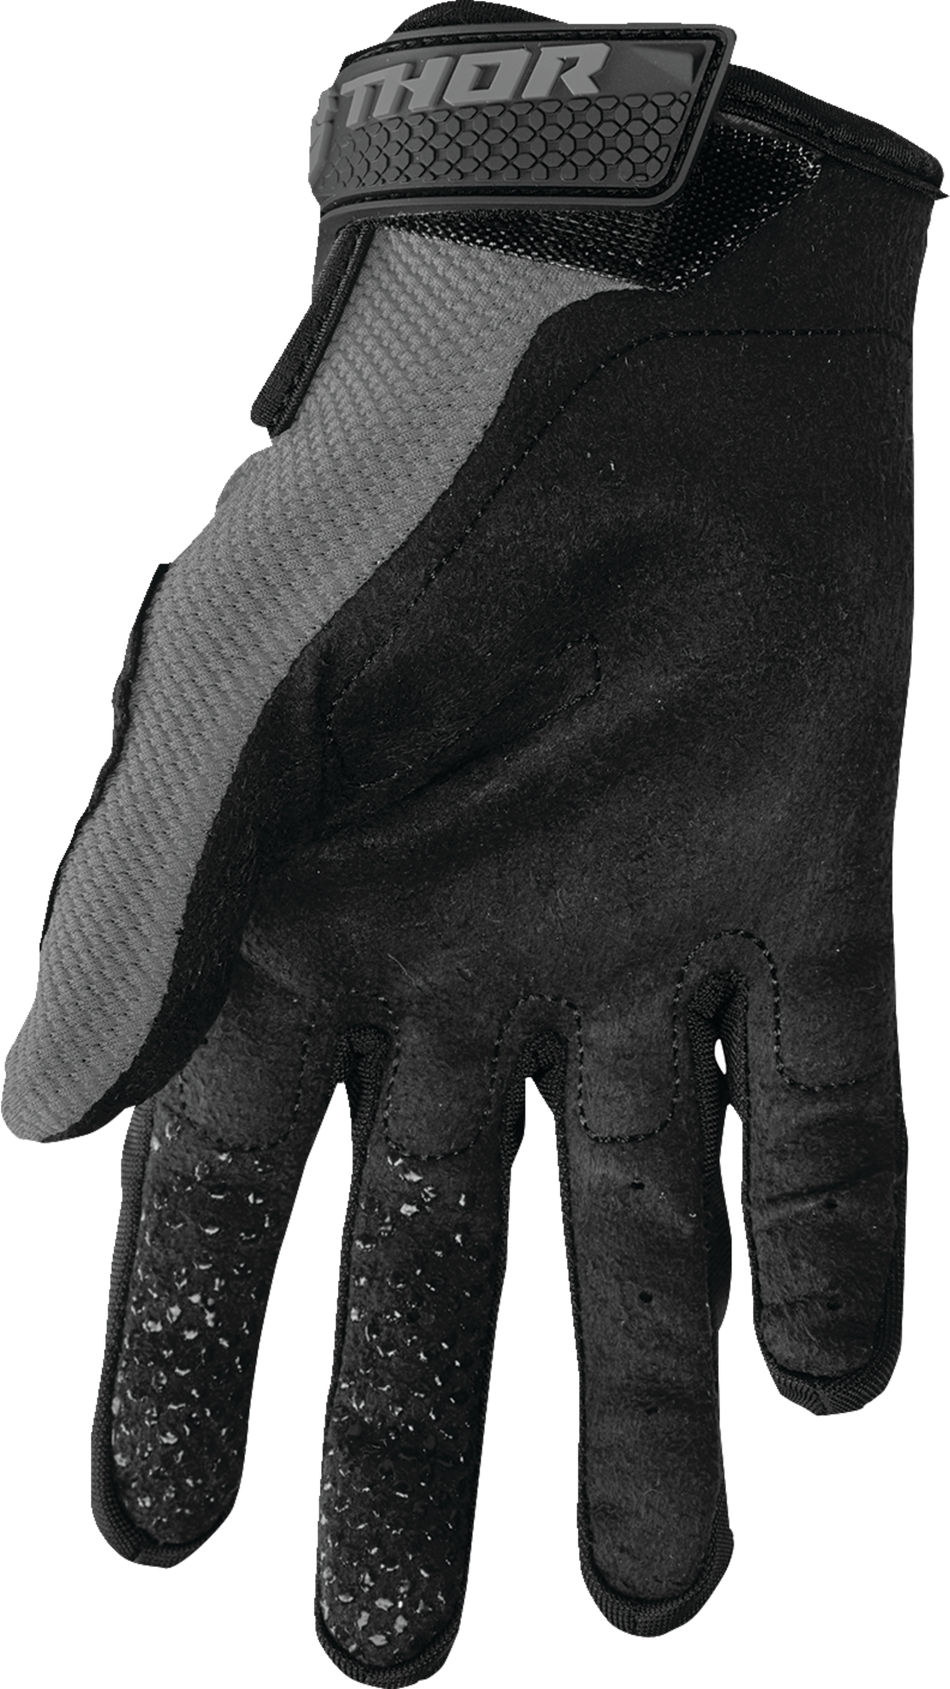 THOR Sector Gloves - Gray/White - XS 3330-7273